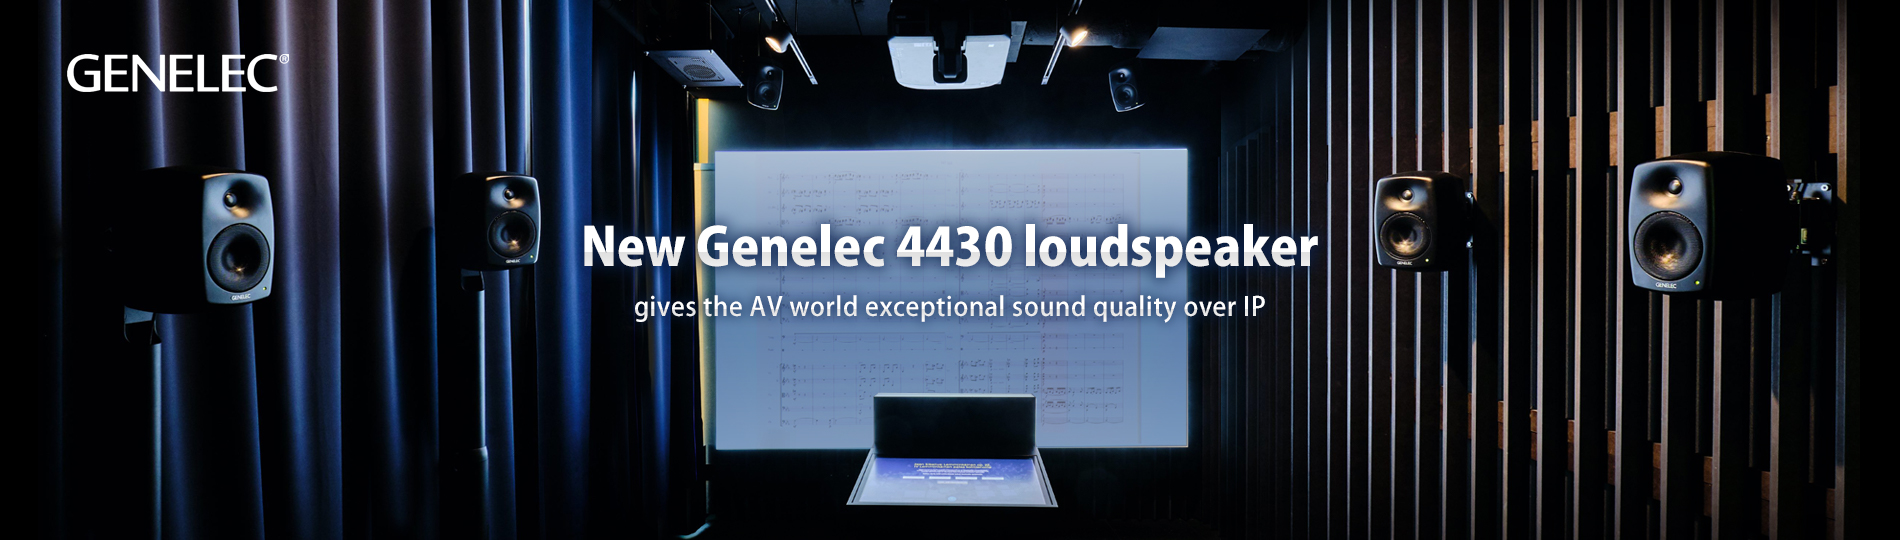 New Genelec 4430 loudspeaker gives the AV world exceptional sound quality over IP